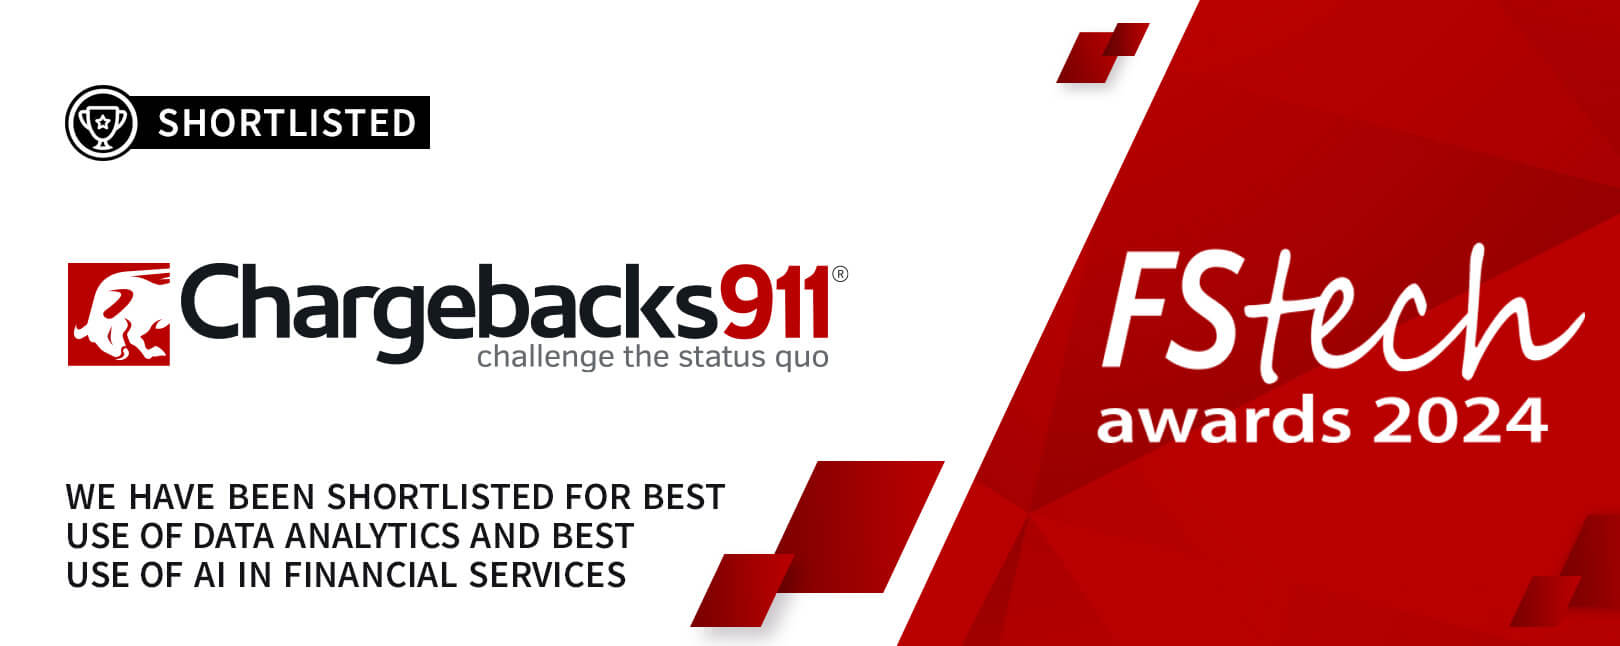 Chargebacks911®: The “Best Use of Data & Analytics” for 2024!